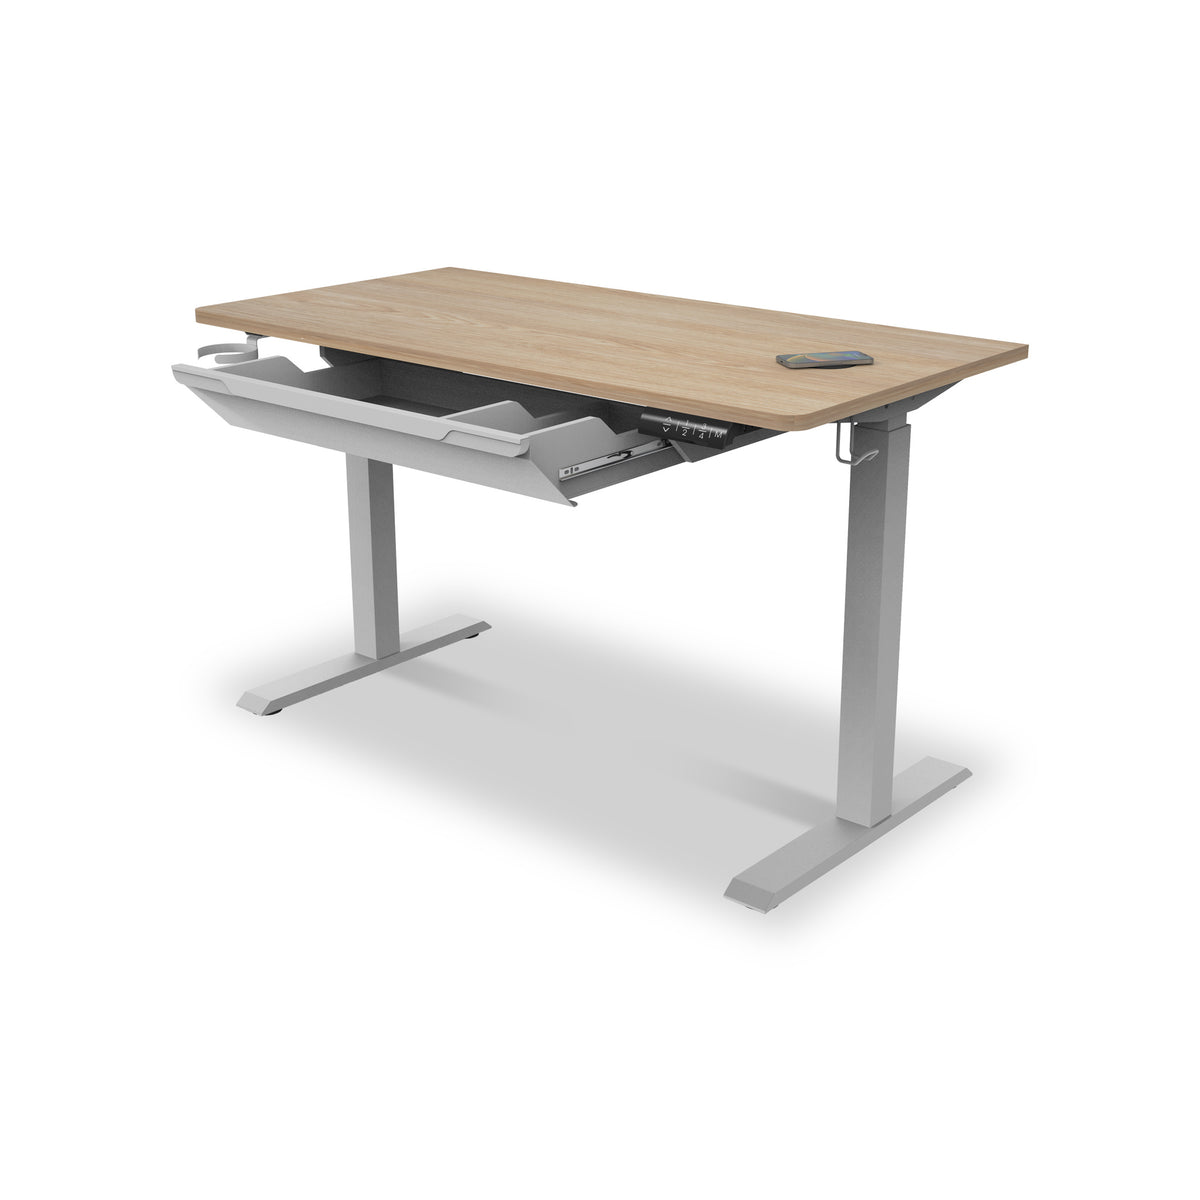 Gino Ash Smart Electric Height Adjustable Desk with Storage Drawer and wireless charging